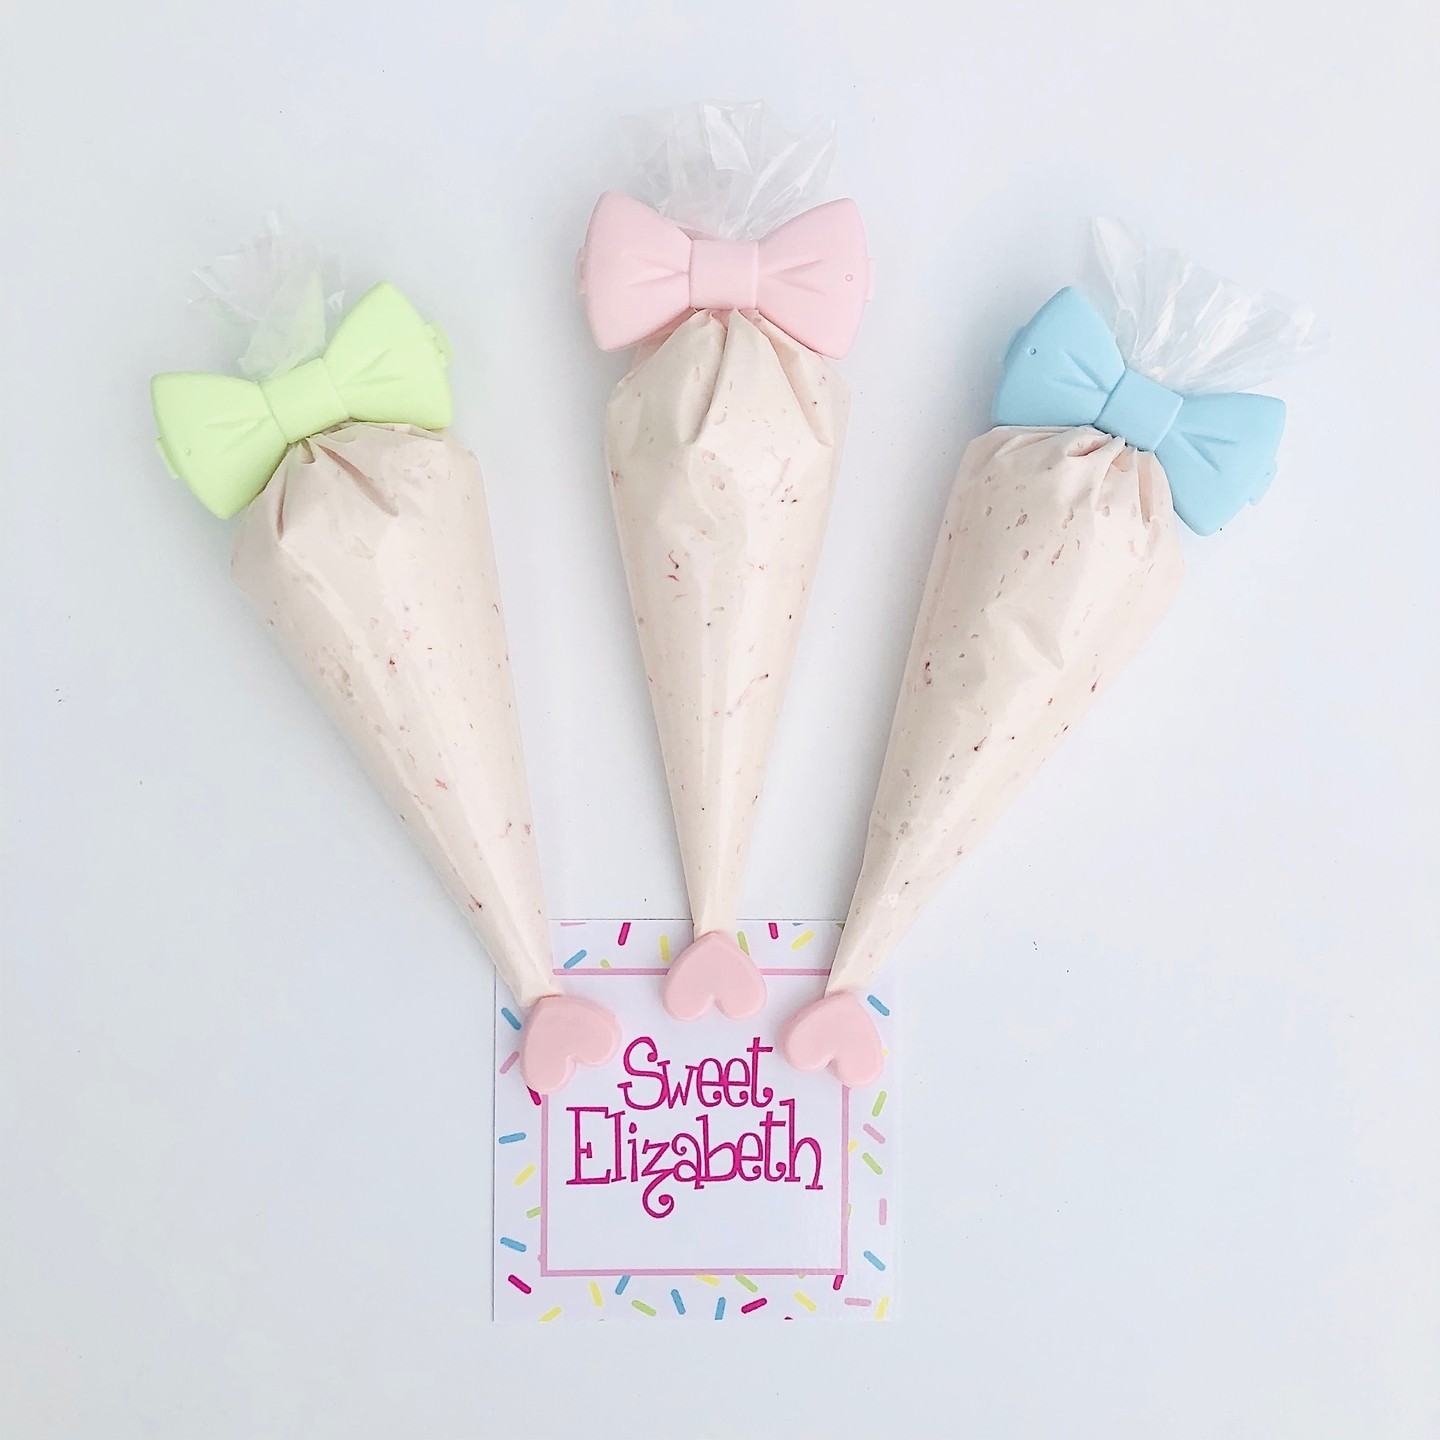 These clips are an absolute MUST for anyone using piping bags👏🏻👏🏻 Buy yours now on our website!!🤩🥳

Which color is your favorite?